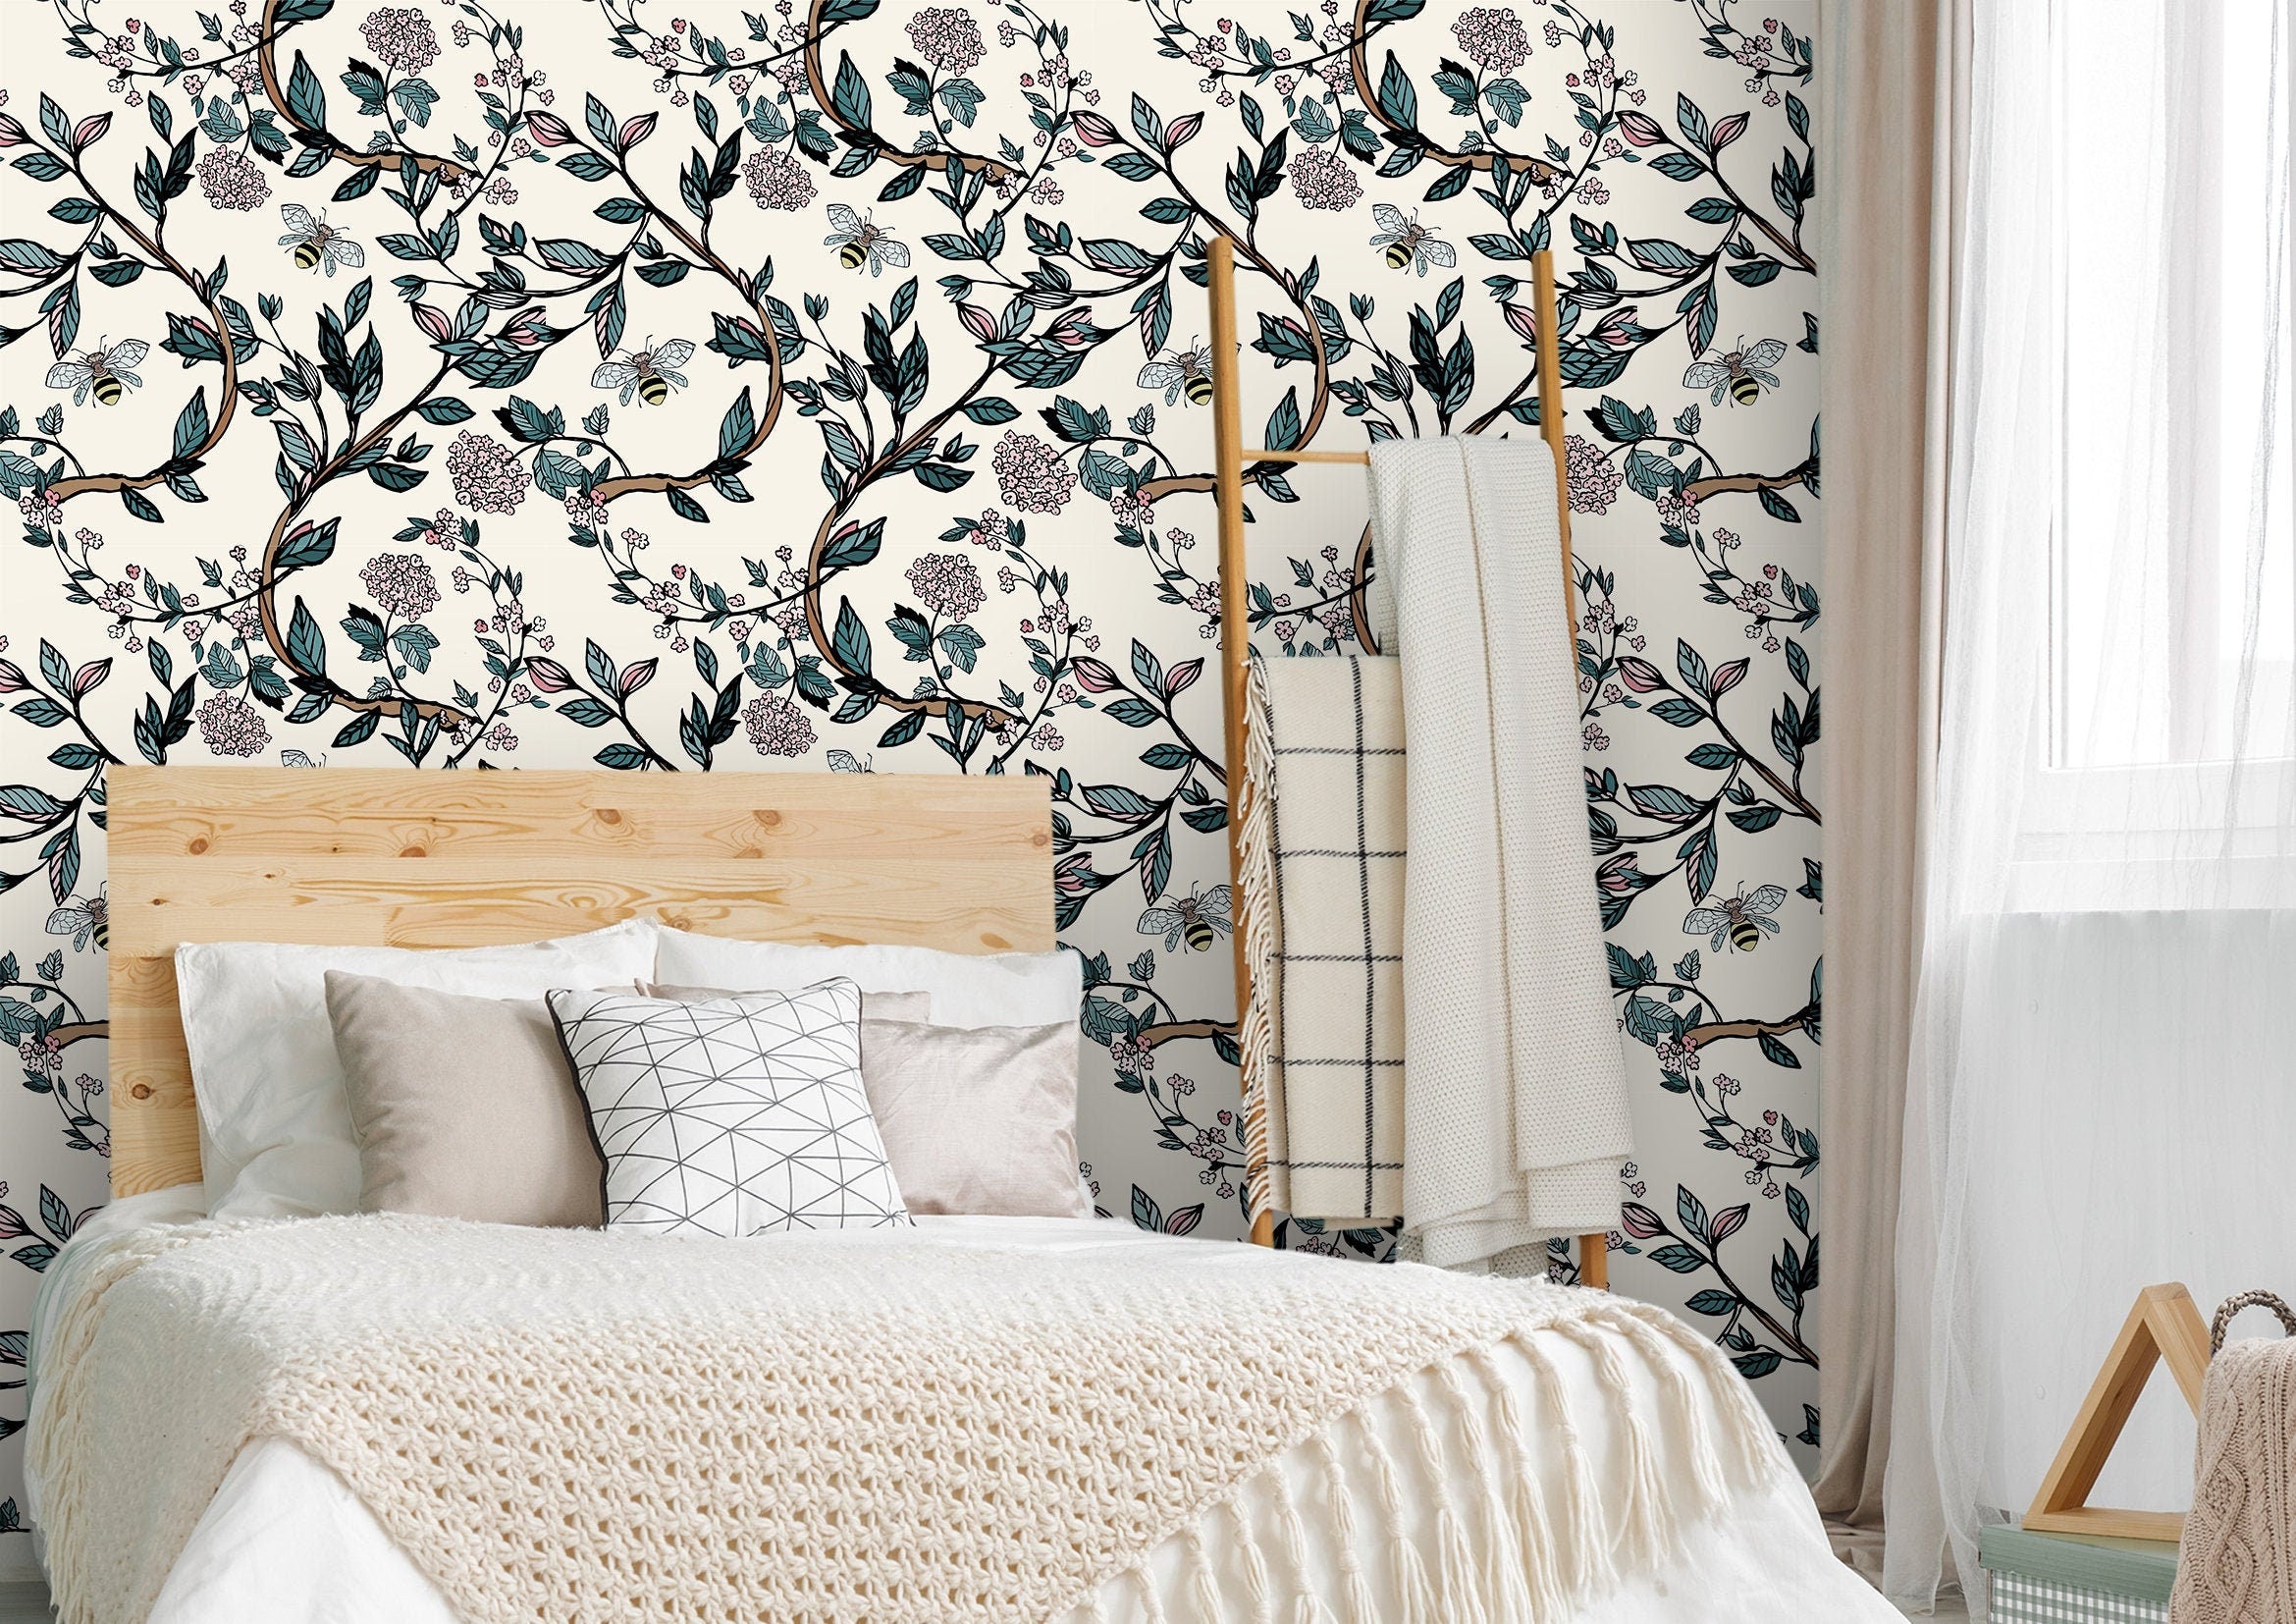 Floral Bee Branches Floral Wallpaper | Wallpaper Peel and Stick | Removable Wallpaper | Wall Paper Peel And Stick 2072 - JamesAndColors